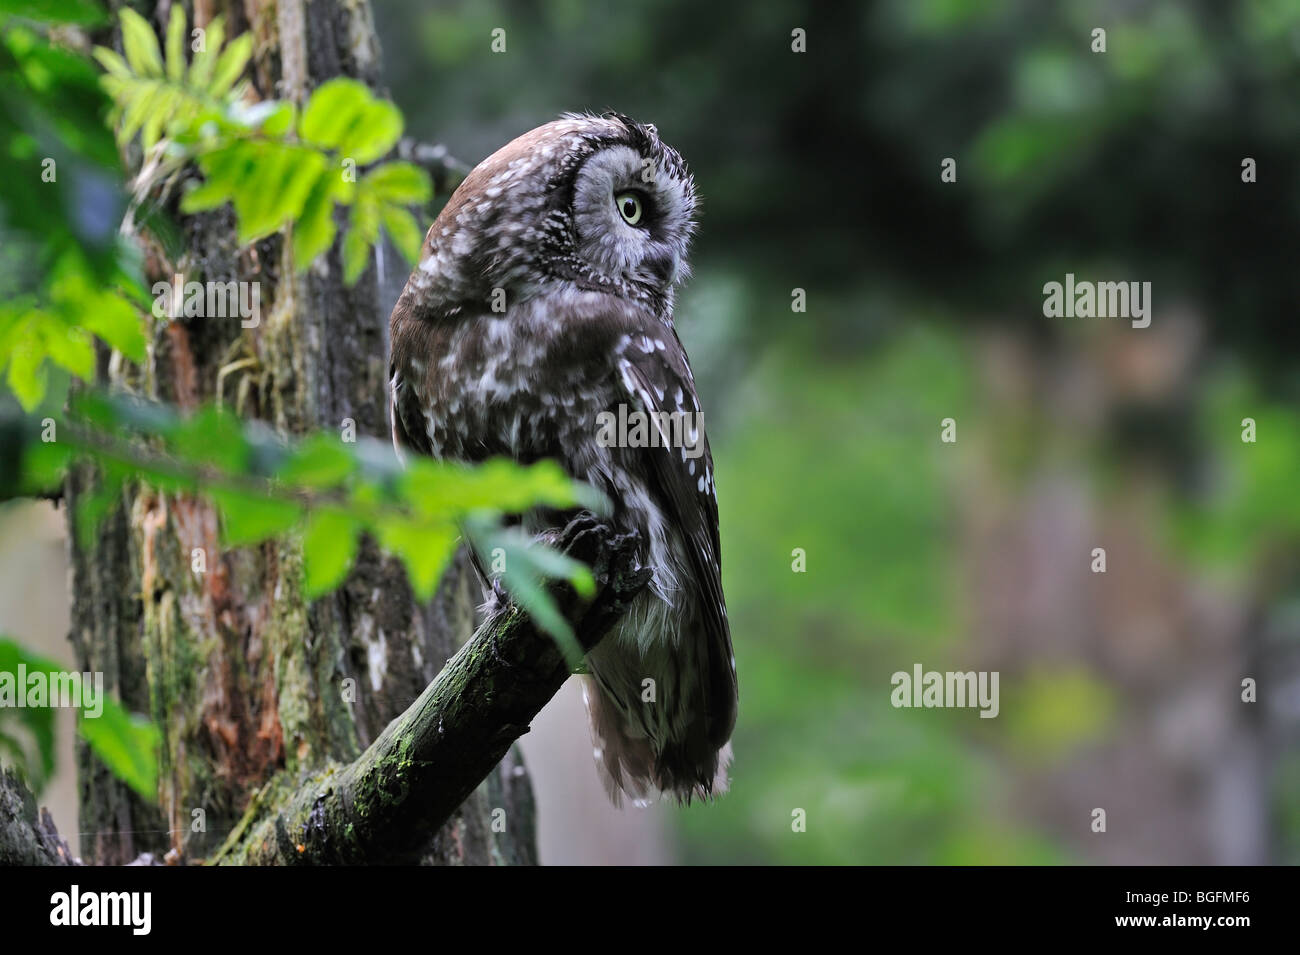 Tengmalm's owl (Aegolius funereus) perched in tree in forest Stock Photo